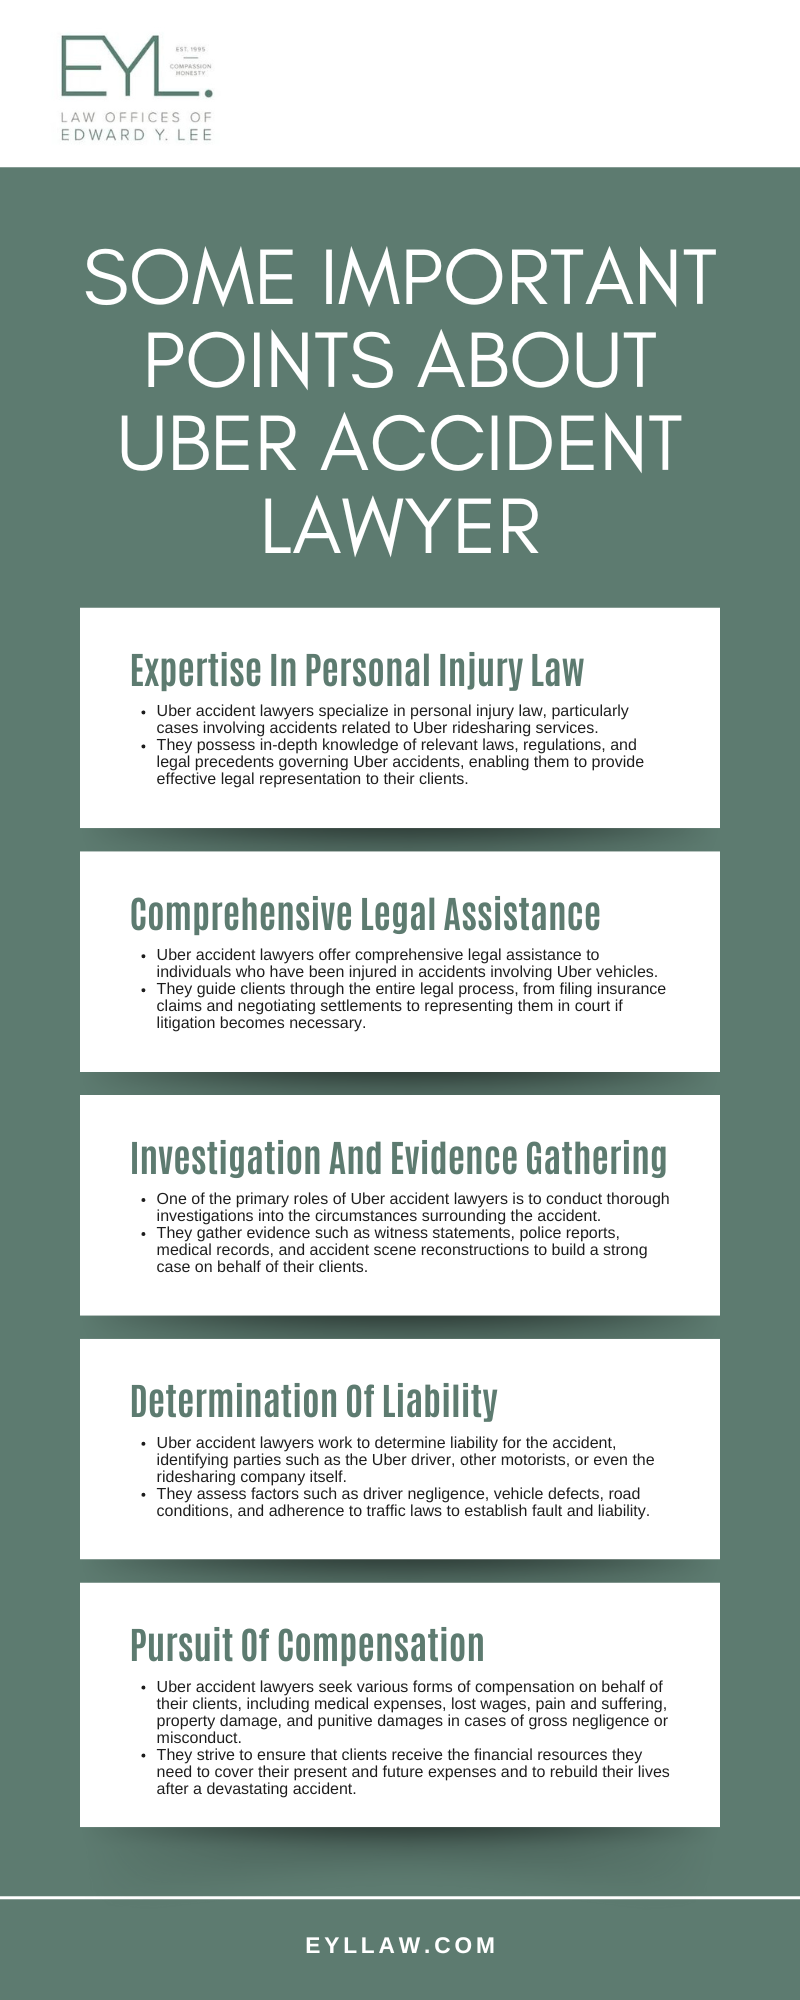 Some Important Points About Uber Accident Lawyer Infographic